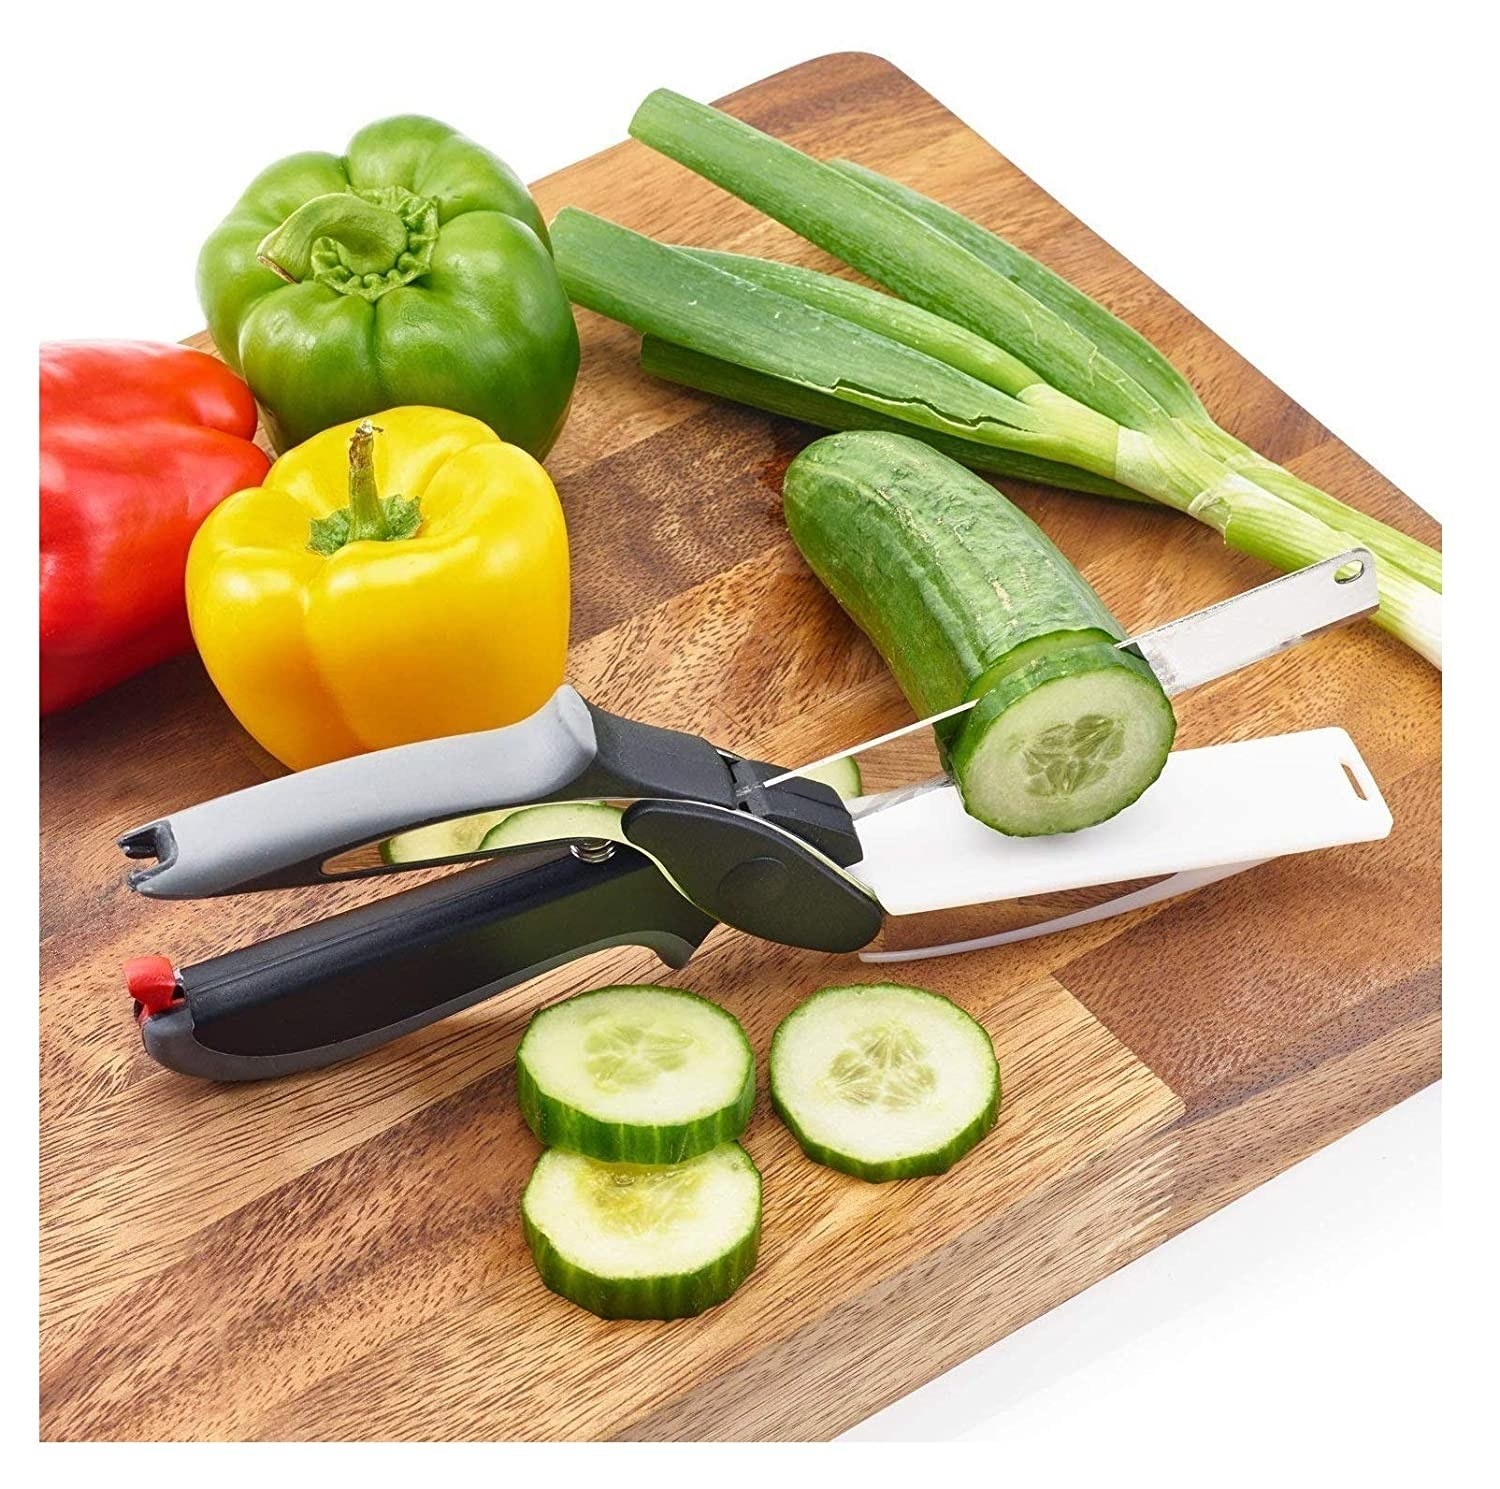 The spring action knife being used to cut cucumber.